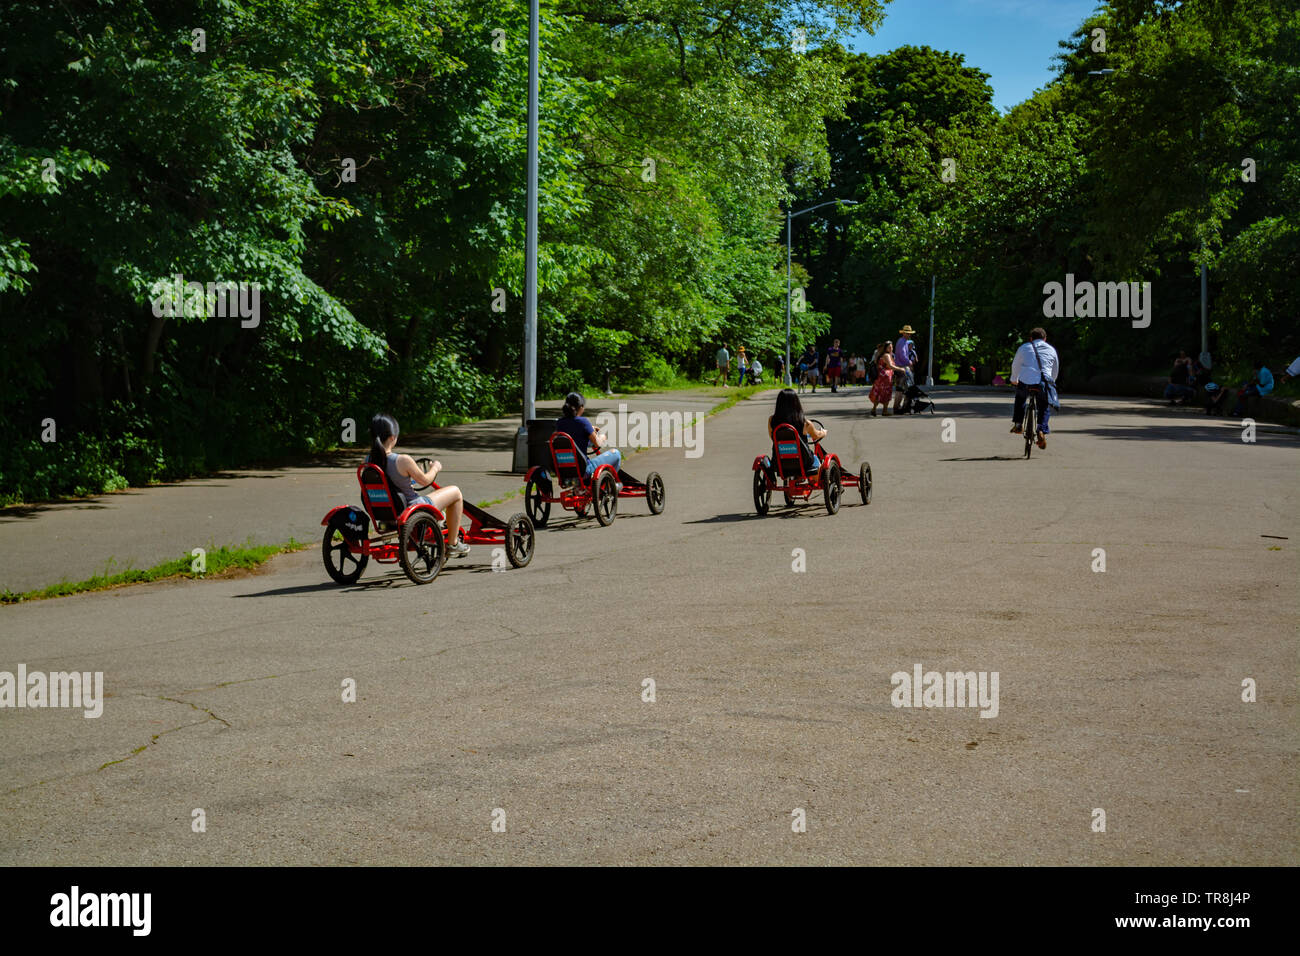 Three Asian young girls are pedaling tricycles on the park road. Stock Photo